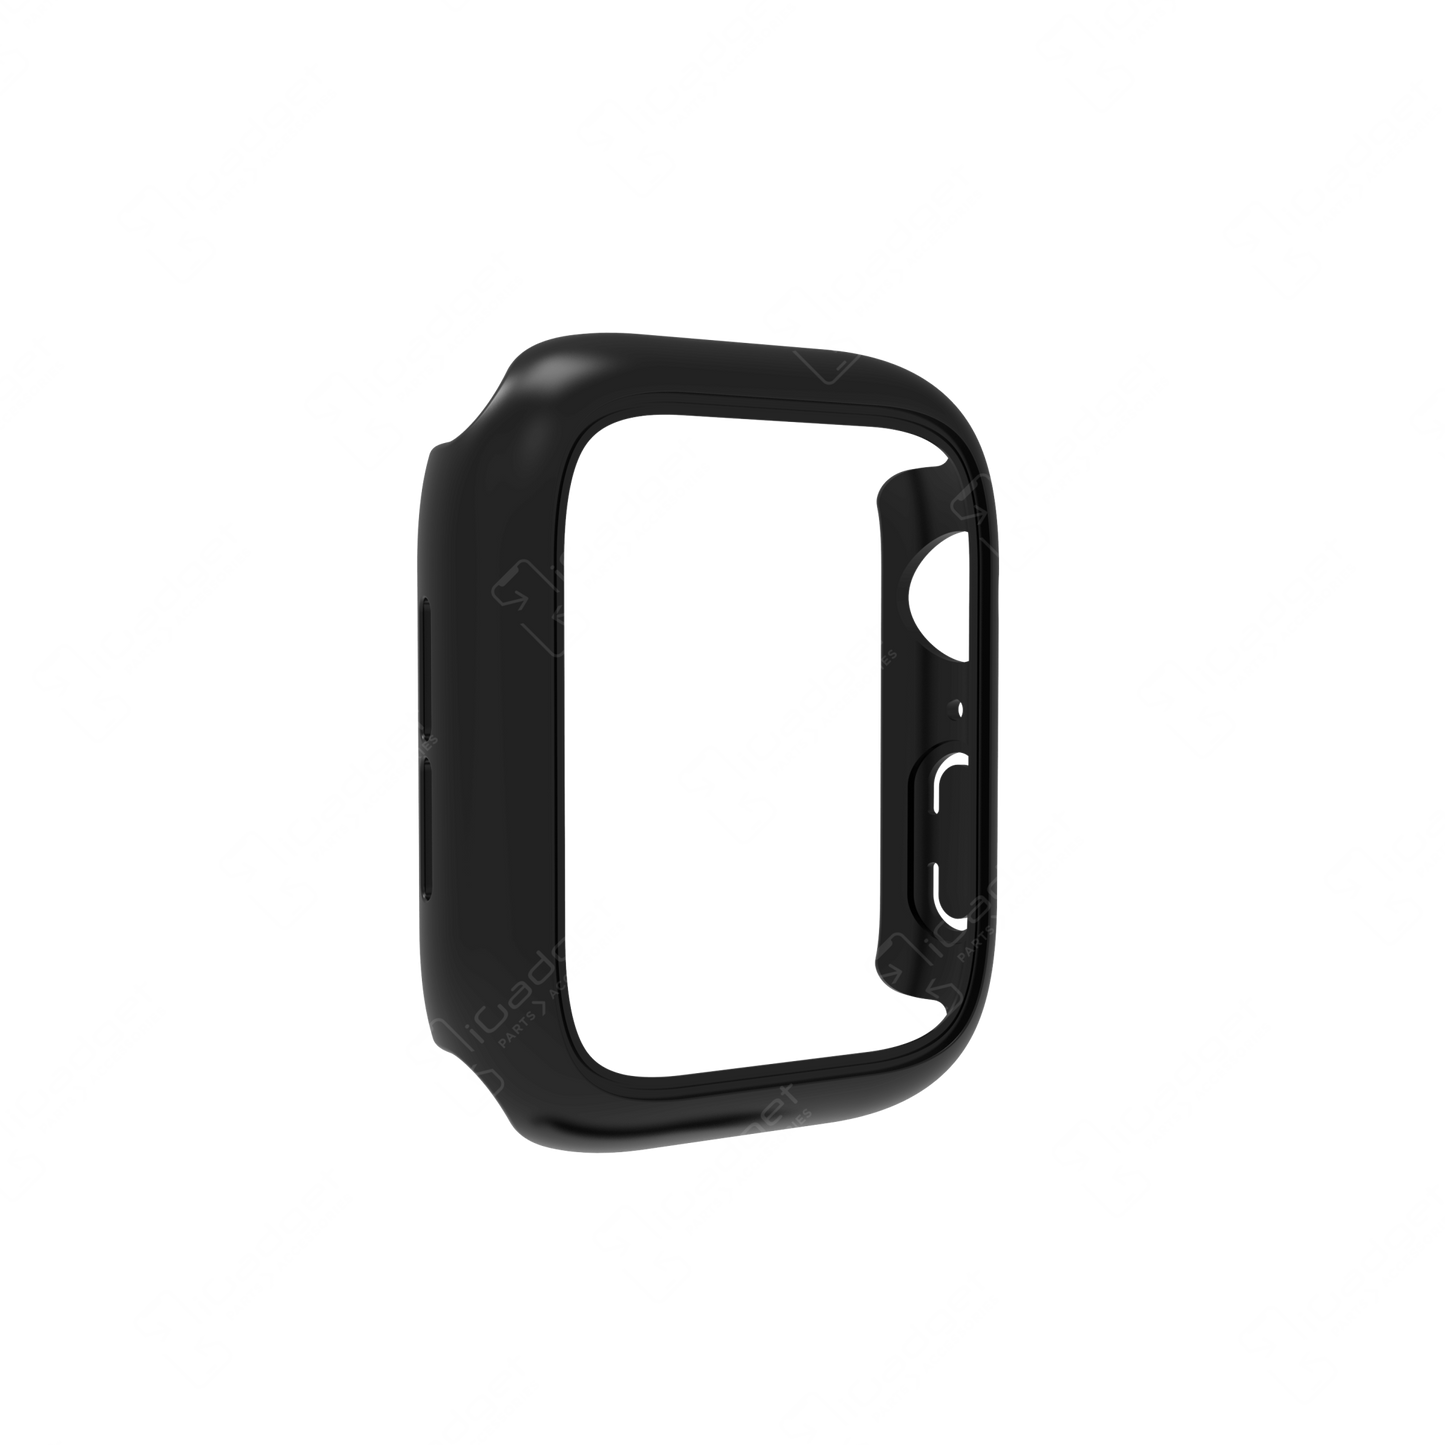 Apple Watch 38mm 2-in-1 Case and Screen Protector (Series 1, 2 & 3)